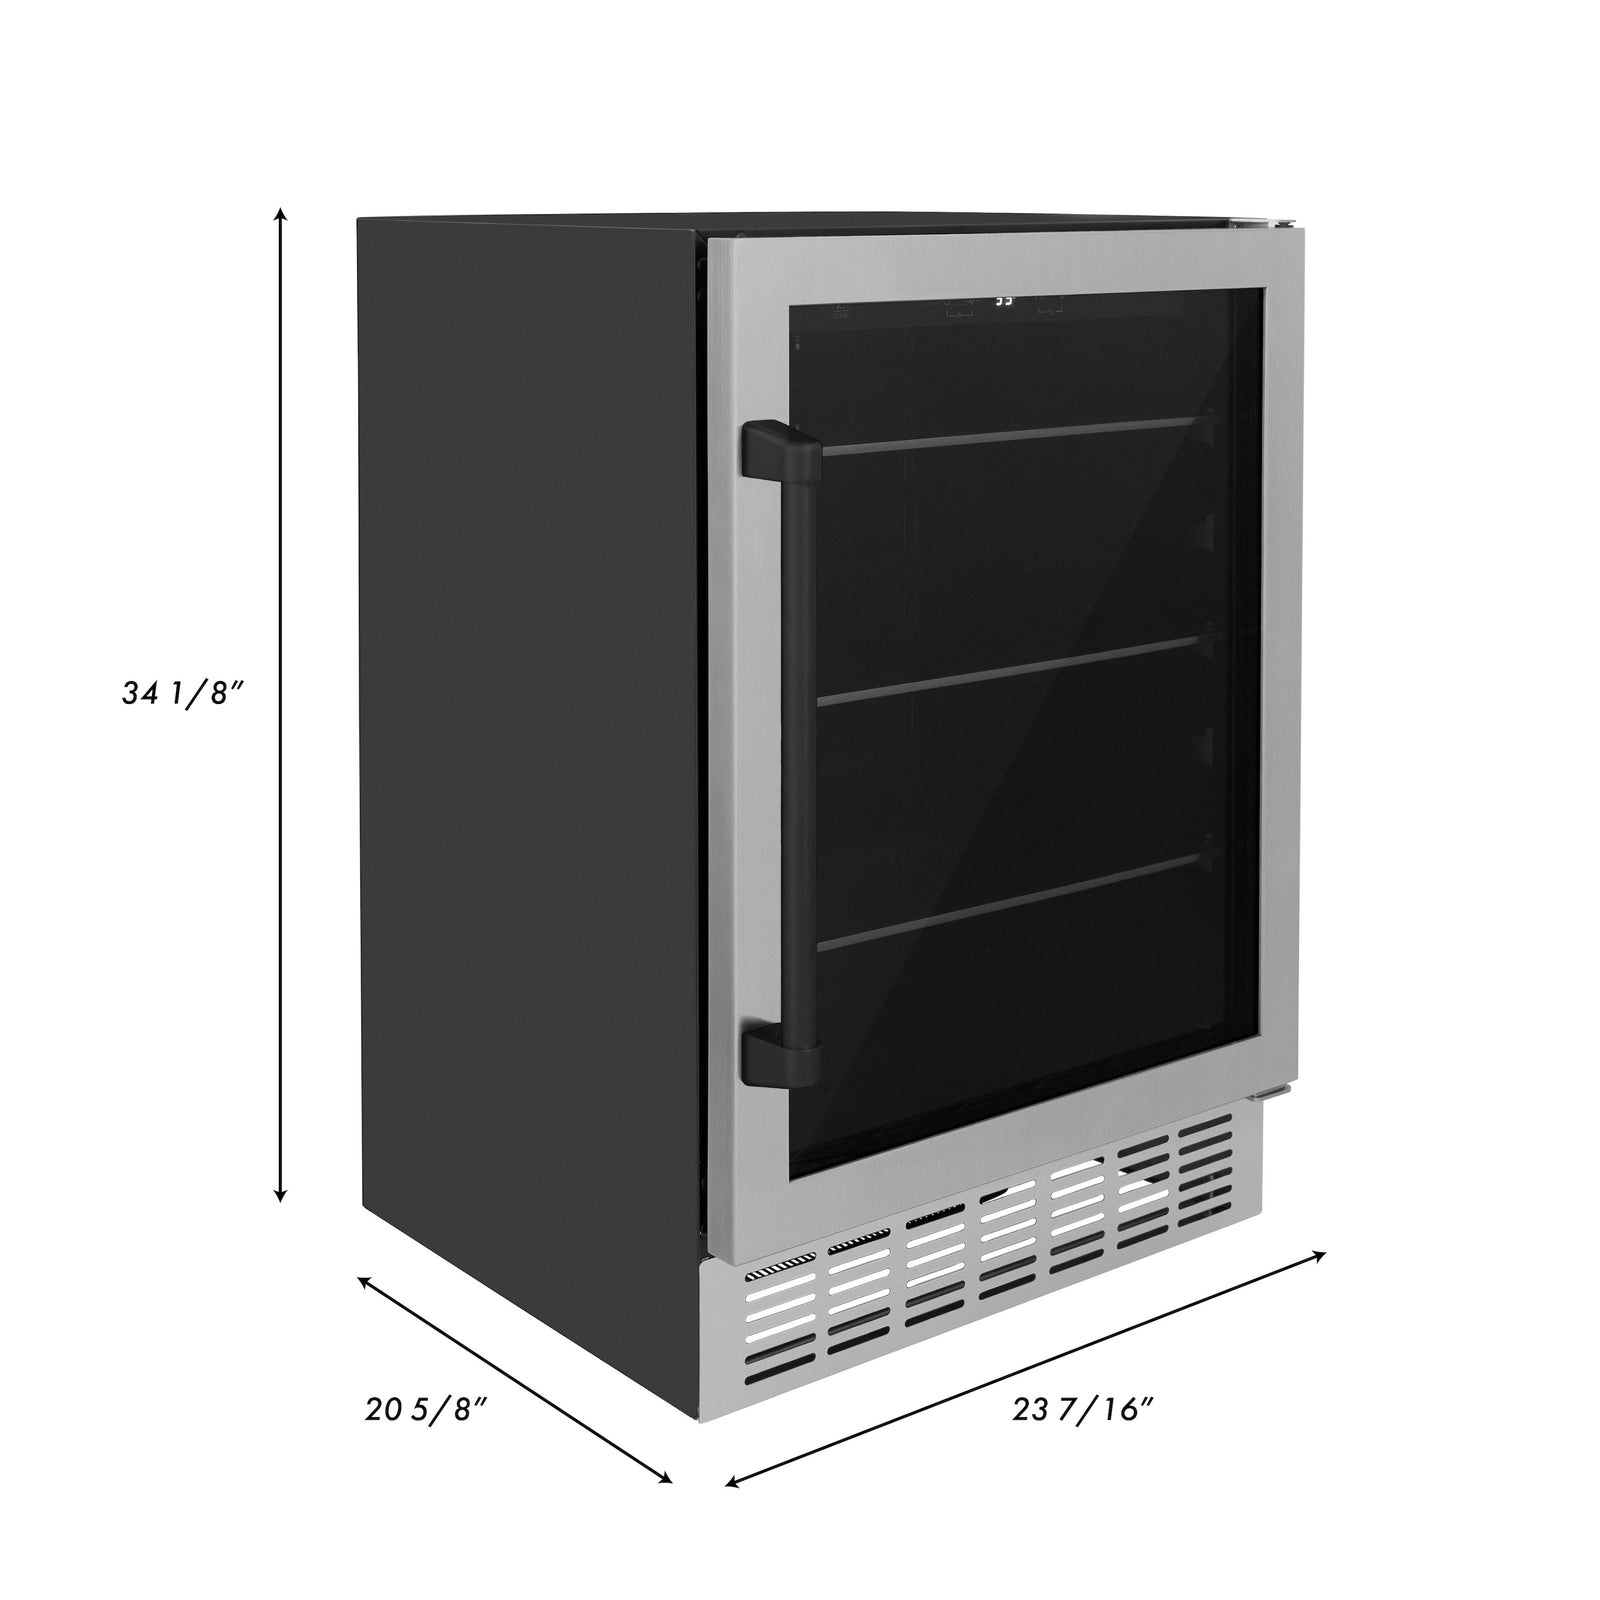 ZLINE 24" Autograph 154 Can Beverage Fridge in Stainless Steel with Black Accents - Monument Series, RBVZ-US-24-MB - Smart Kitchen Lab